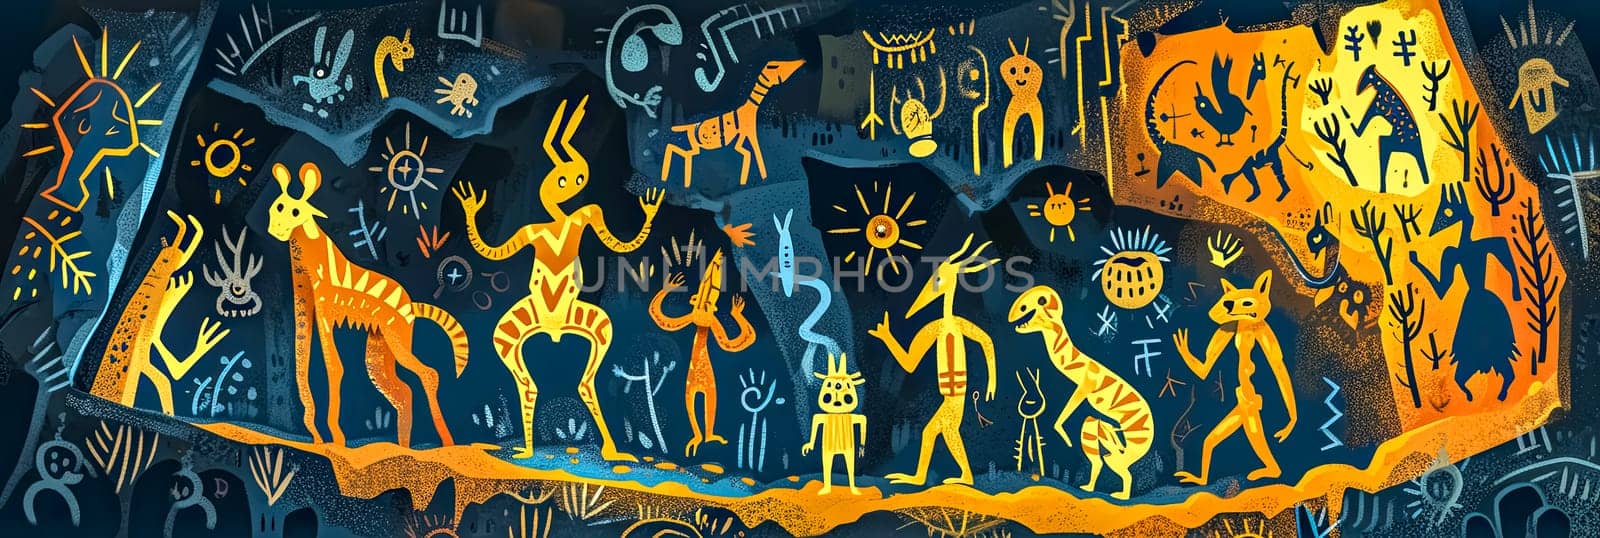 mural of cave art depicting various abstract and mythical creatures, human figures, and symbols in a vibrant array of orange, yellow, and blue hues